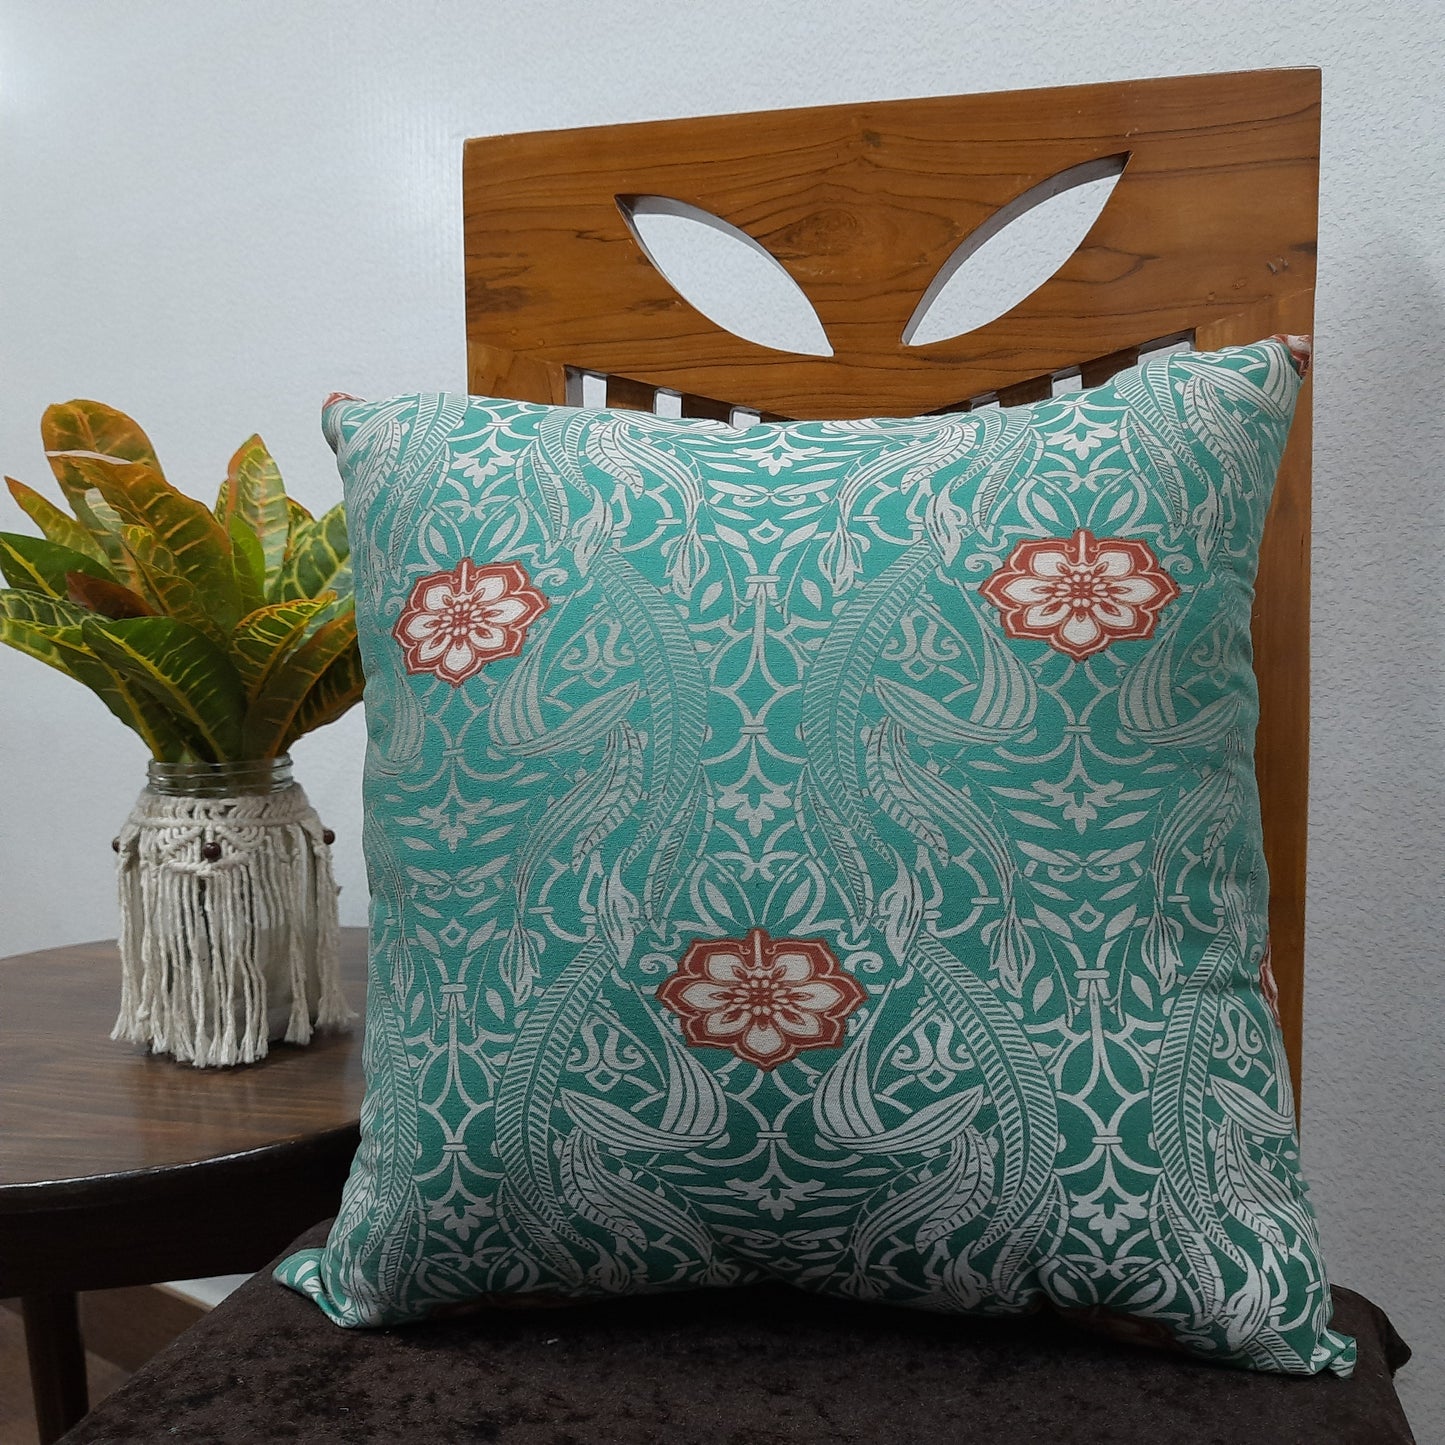 Riviera Collection-Cushion Covers In Glace Cotton For Regular Use –Sea-Green Ethnic Design– Best Price 40cm x 40cm (~16″ x 16″) – Set of 5